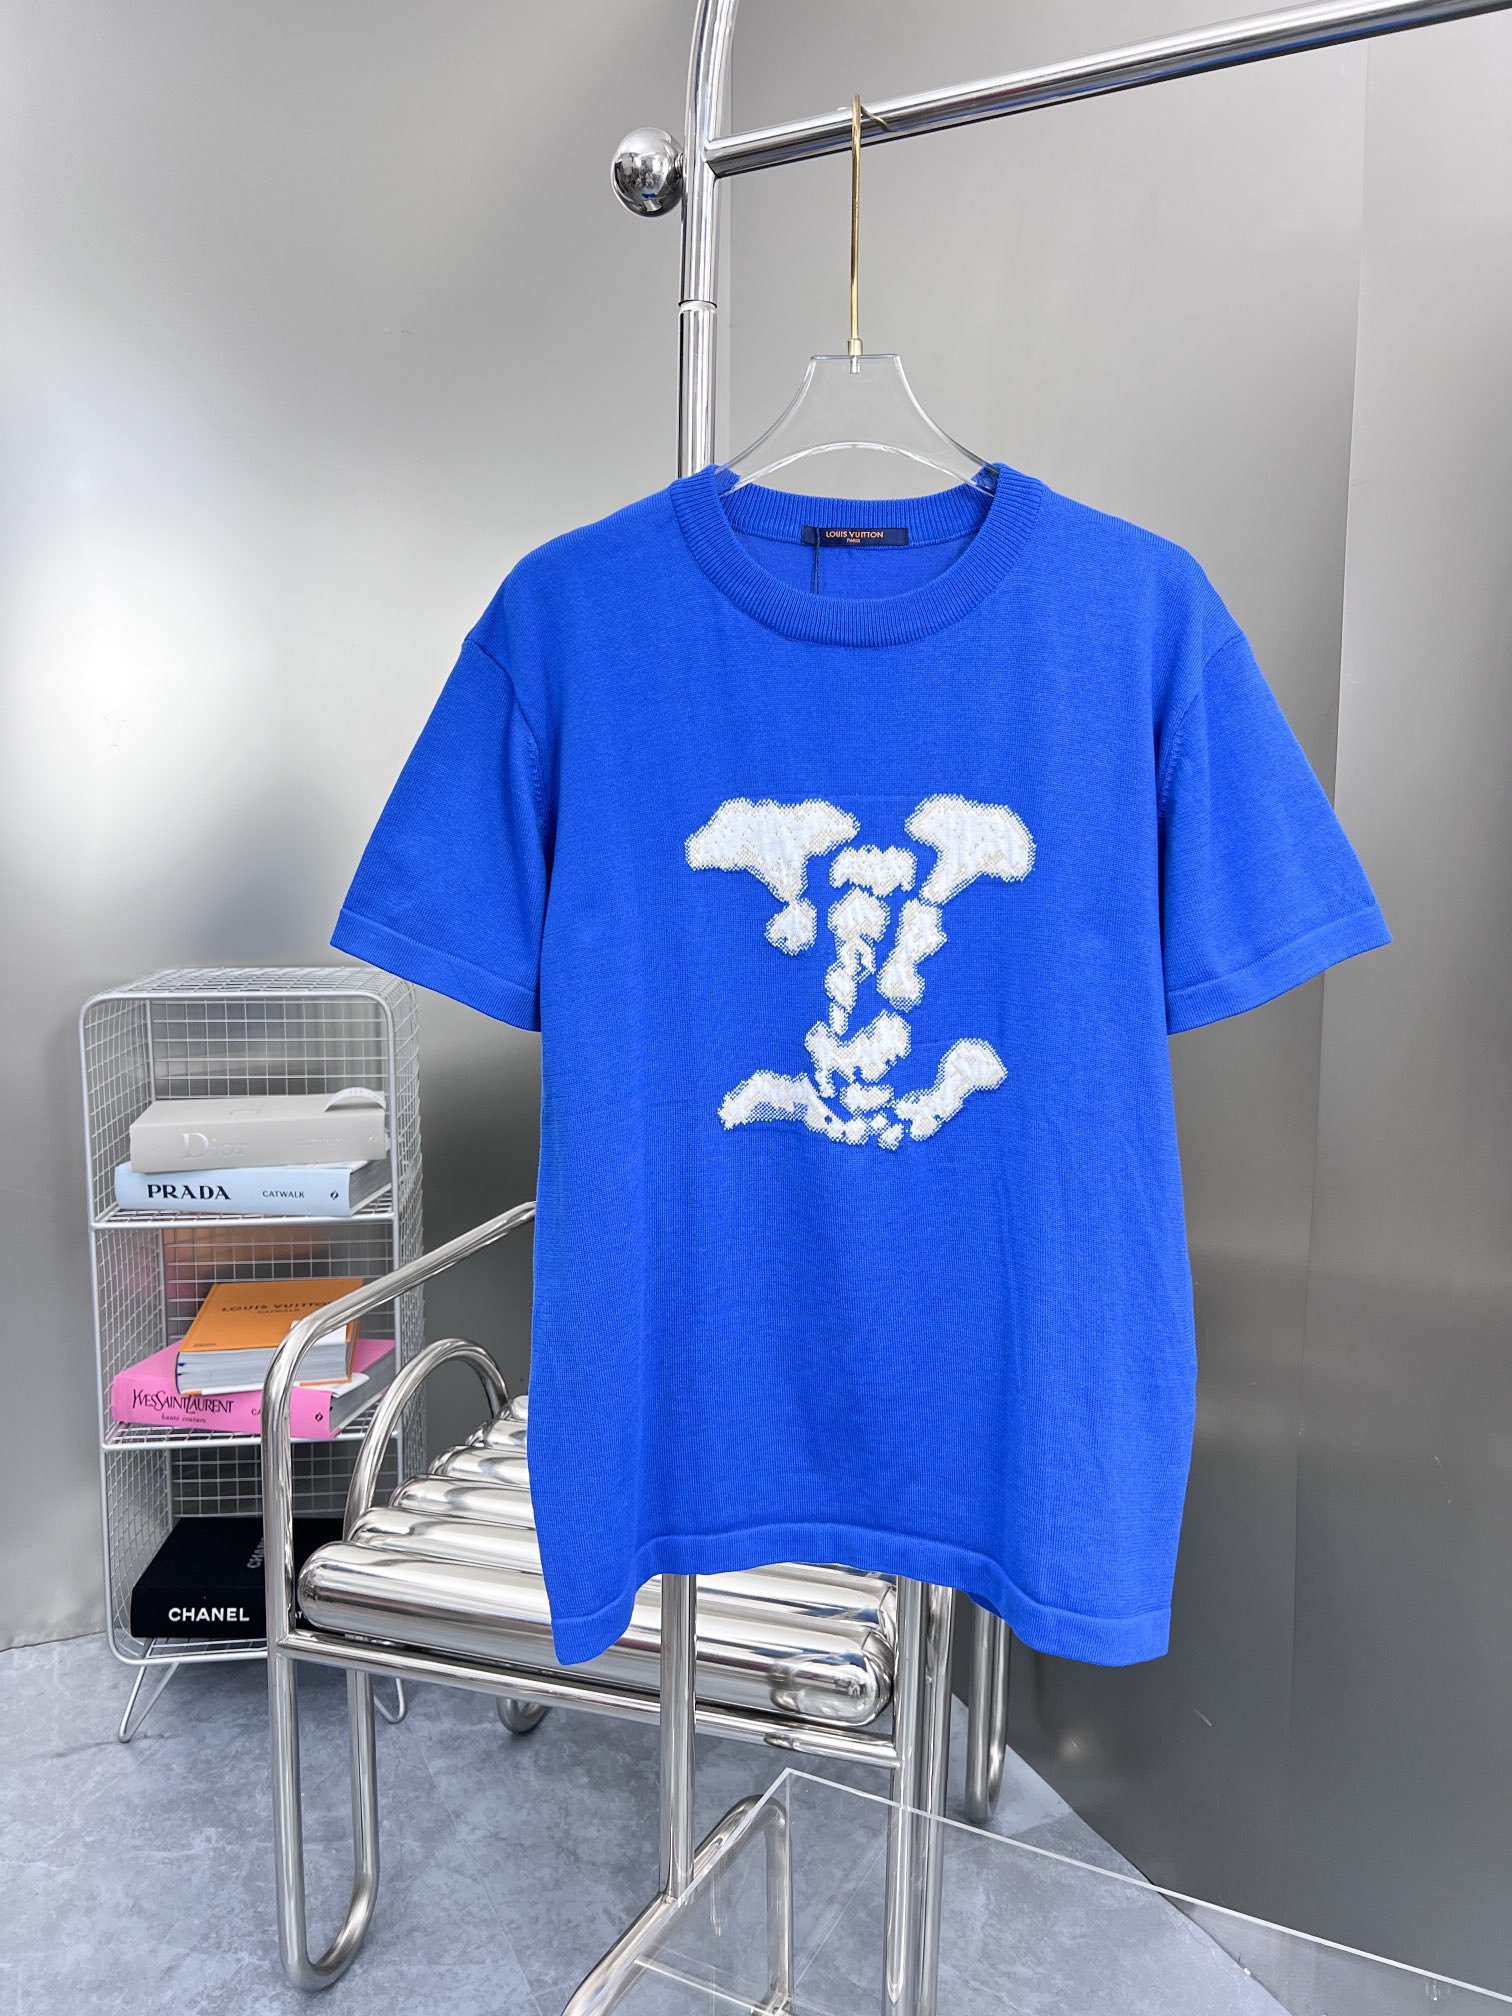 Louis Vuitton Clothing T-Shirt Blue White Cotton Spring Collection